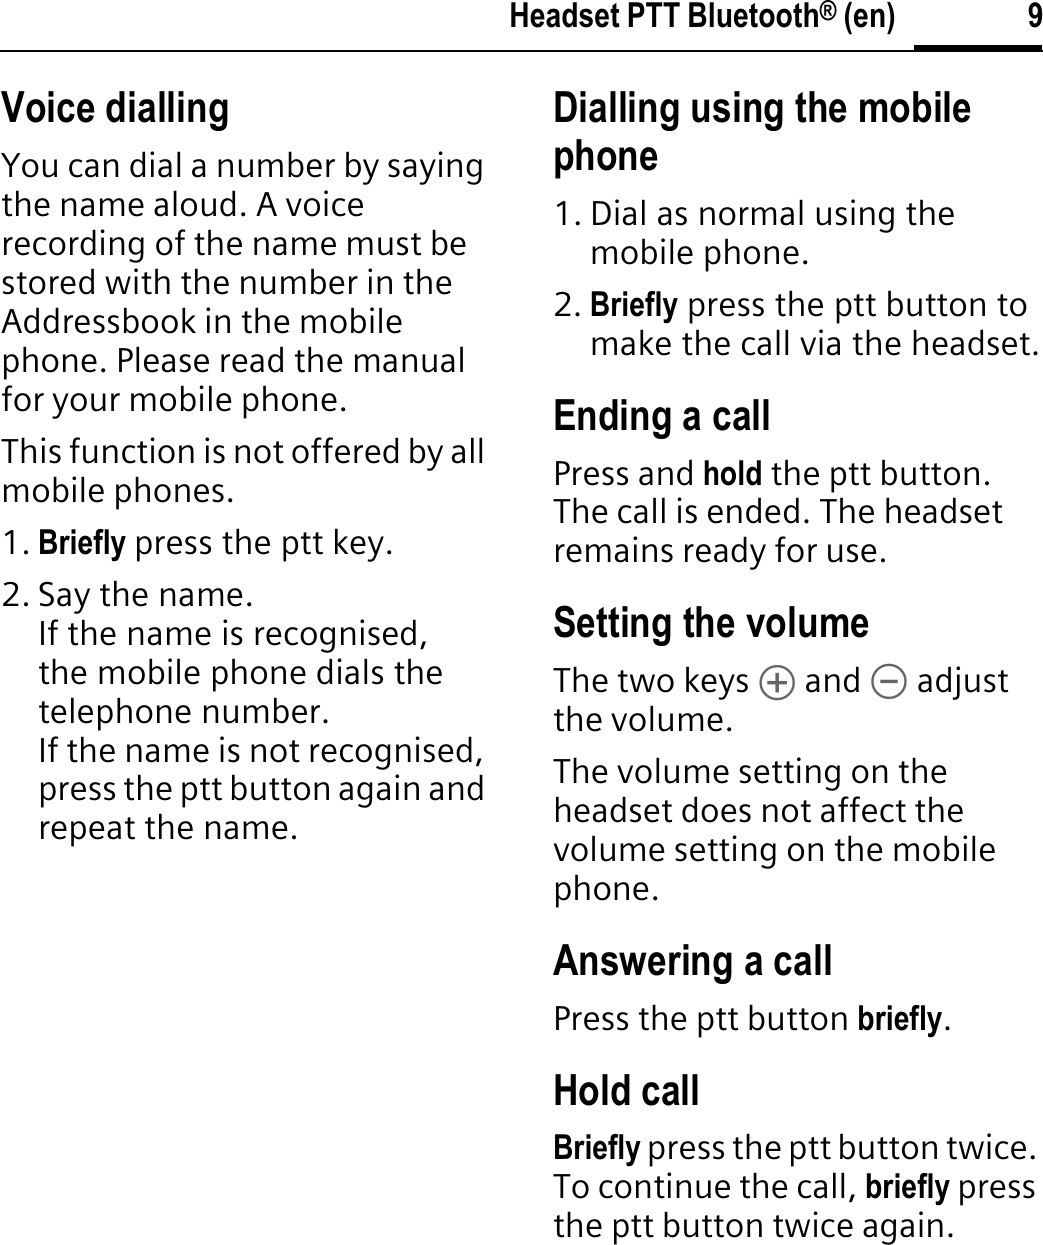 9Headset PTT Bluetooth® (en)Voice diallingYou can dial a number by saying the name aloud. A voice recording of the name must be stored with the number in the Addressbook in the mobile phone. Please read the manual for your mobile phone.This function is not offered by all mobile phones.1. Briefly press the ptt key.2. Say the name.If the name is recognised, the mobile phone dials the telephone number.If the name is not recognised, press the ptt button again and repeat the name.Dialling using the mobile phone1. Dial as normal using the mobile phone.2. Briefly press the ptt button to make the call via the headset.Ending a callPress and hold the ptt button. The call is ended. The headset remains ready for use.Setting the volumeThe two keys [ and \ adjust the volume.The volume setting on the headset does not affect the volume setting on the mobile phone.Answering a callPress the ptt button briefly.Hold callBriefly press the ptt button twice. To continue the call, briefly press the ptt button twice again.